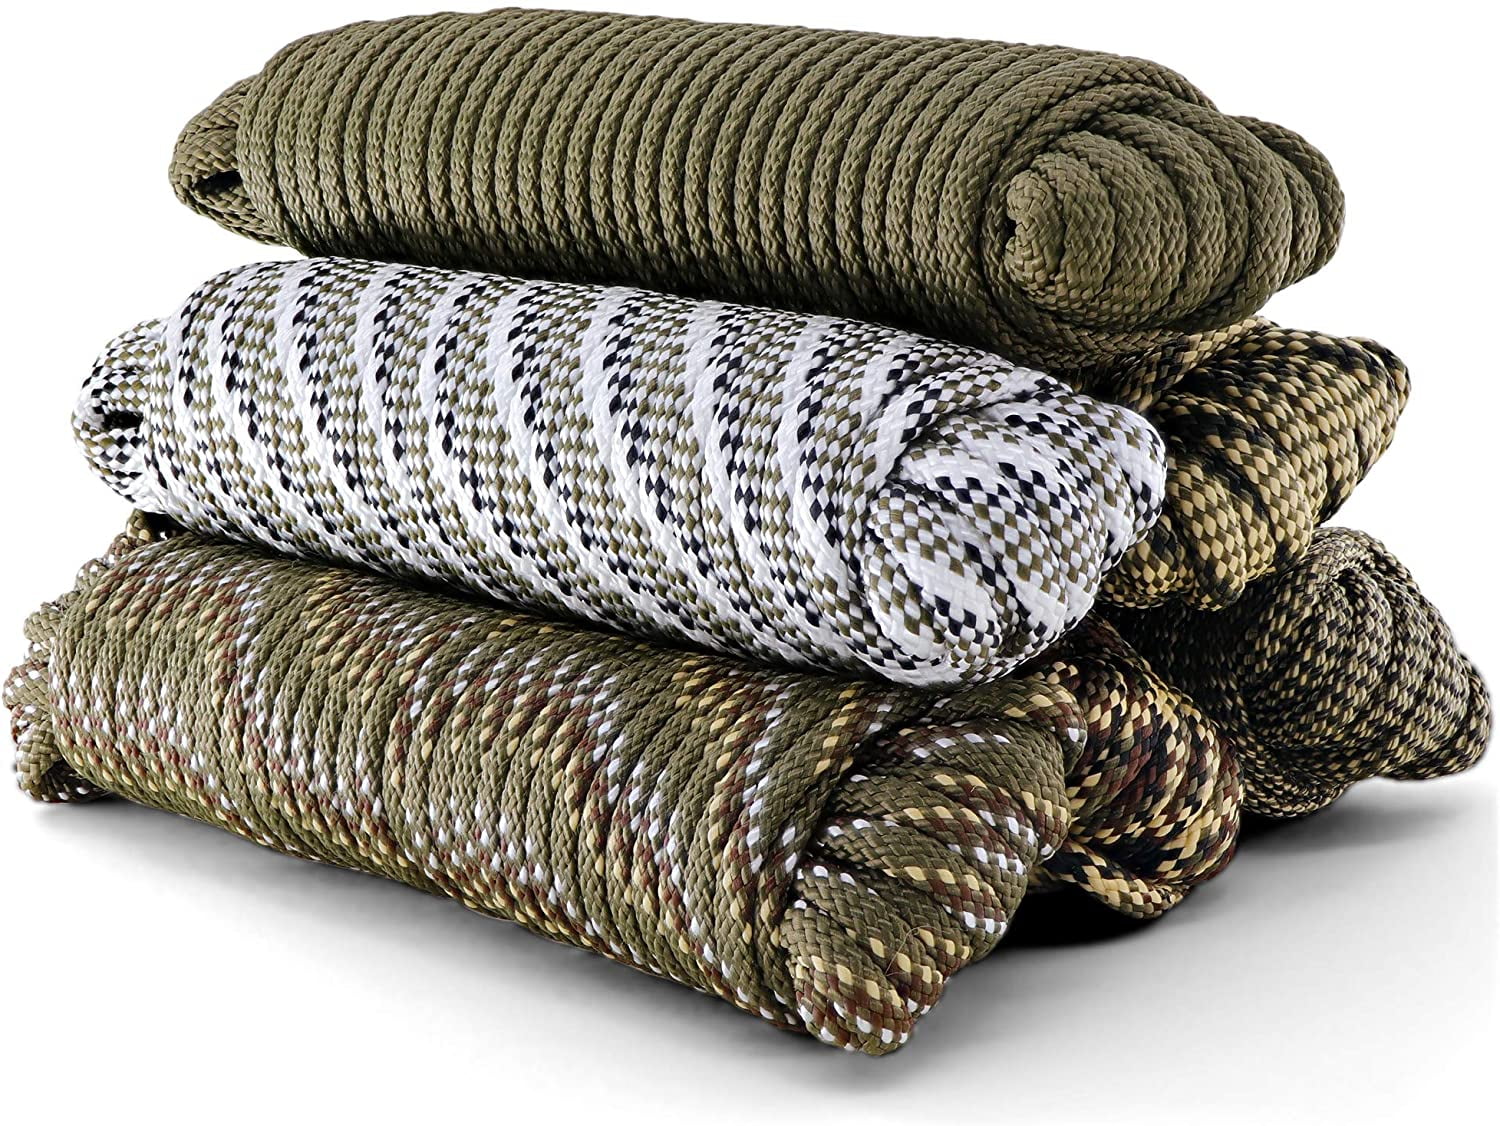 Camping Fishing Camouflage Braided Rope 3/8 Inch All Purpose Utility Cord Lightweight Strong Versatile Minimal Stretch Strand Excellent Knot Retention Perfect for Hunting - by Pildex Random Color